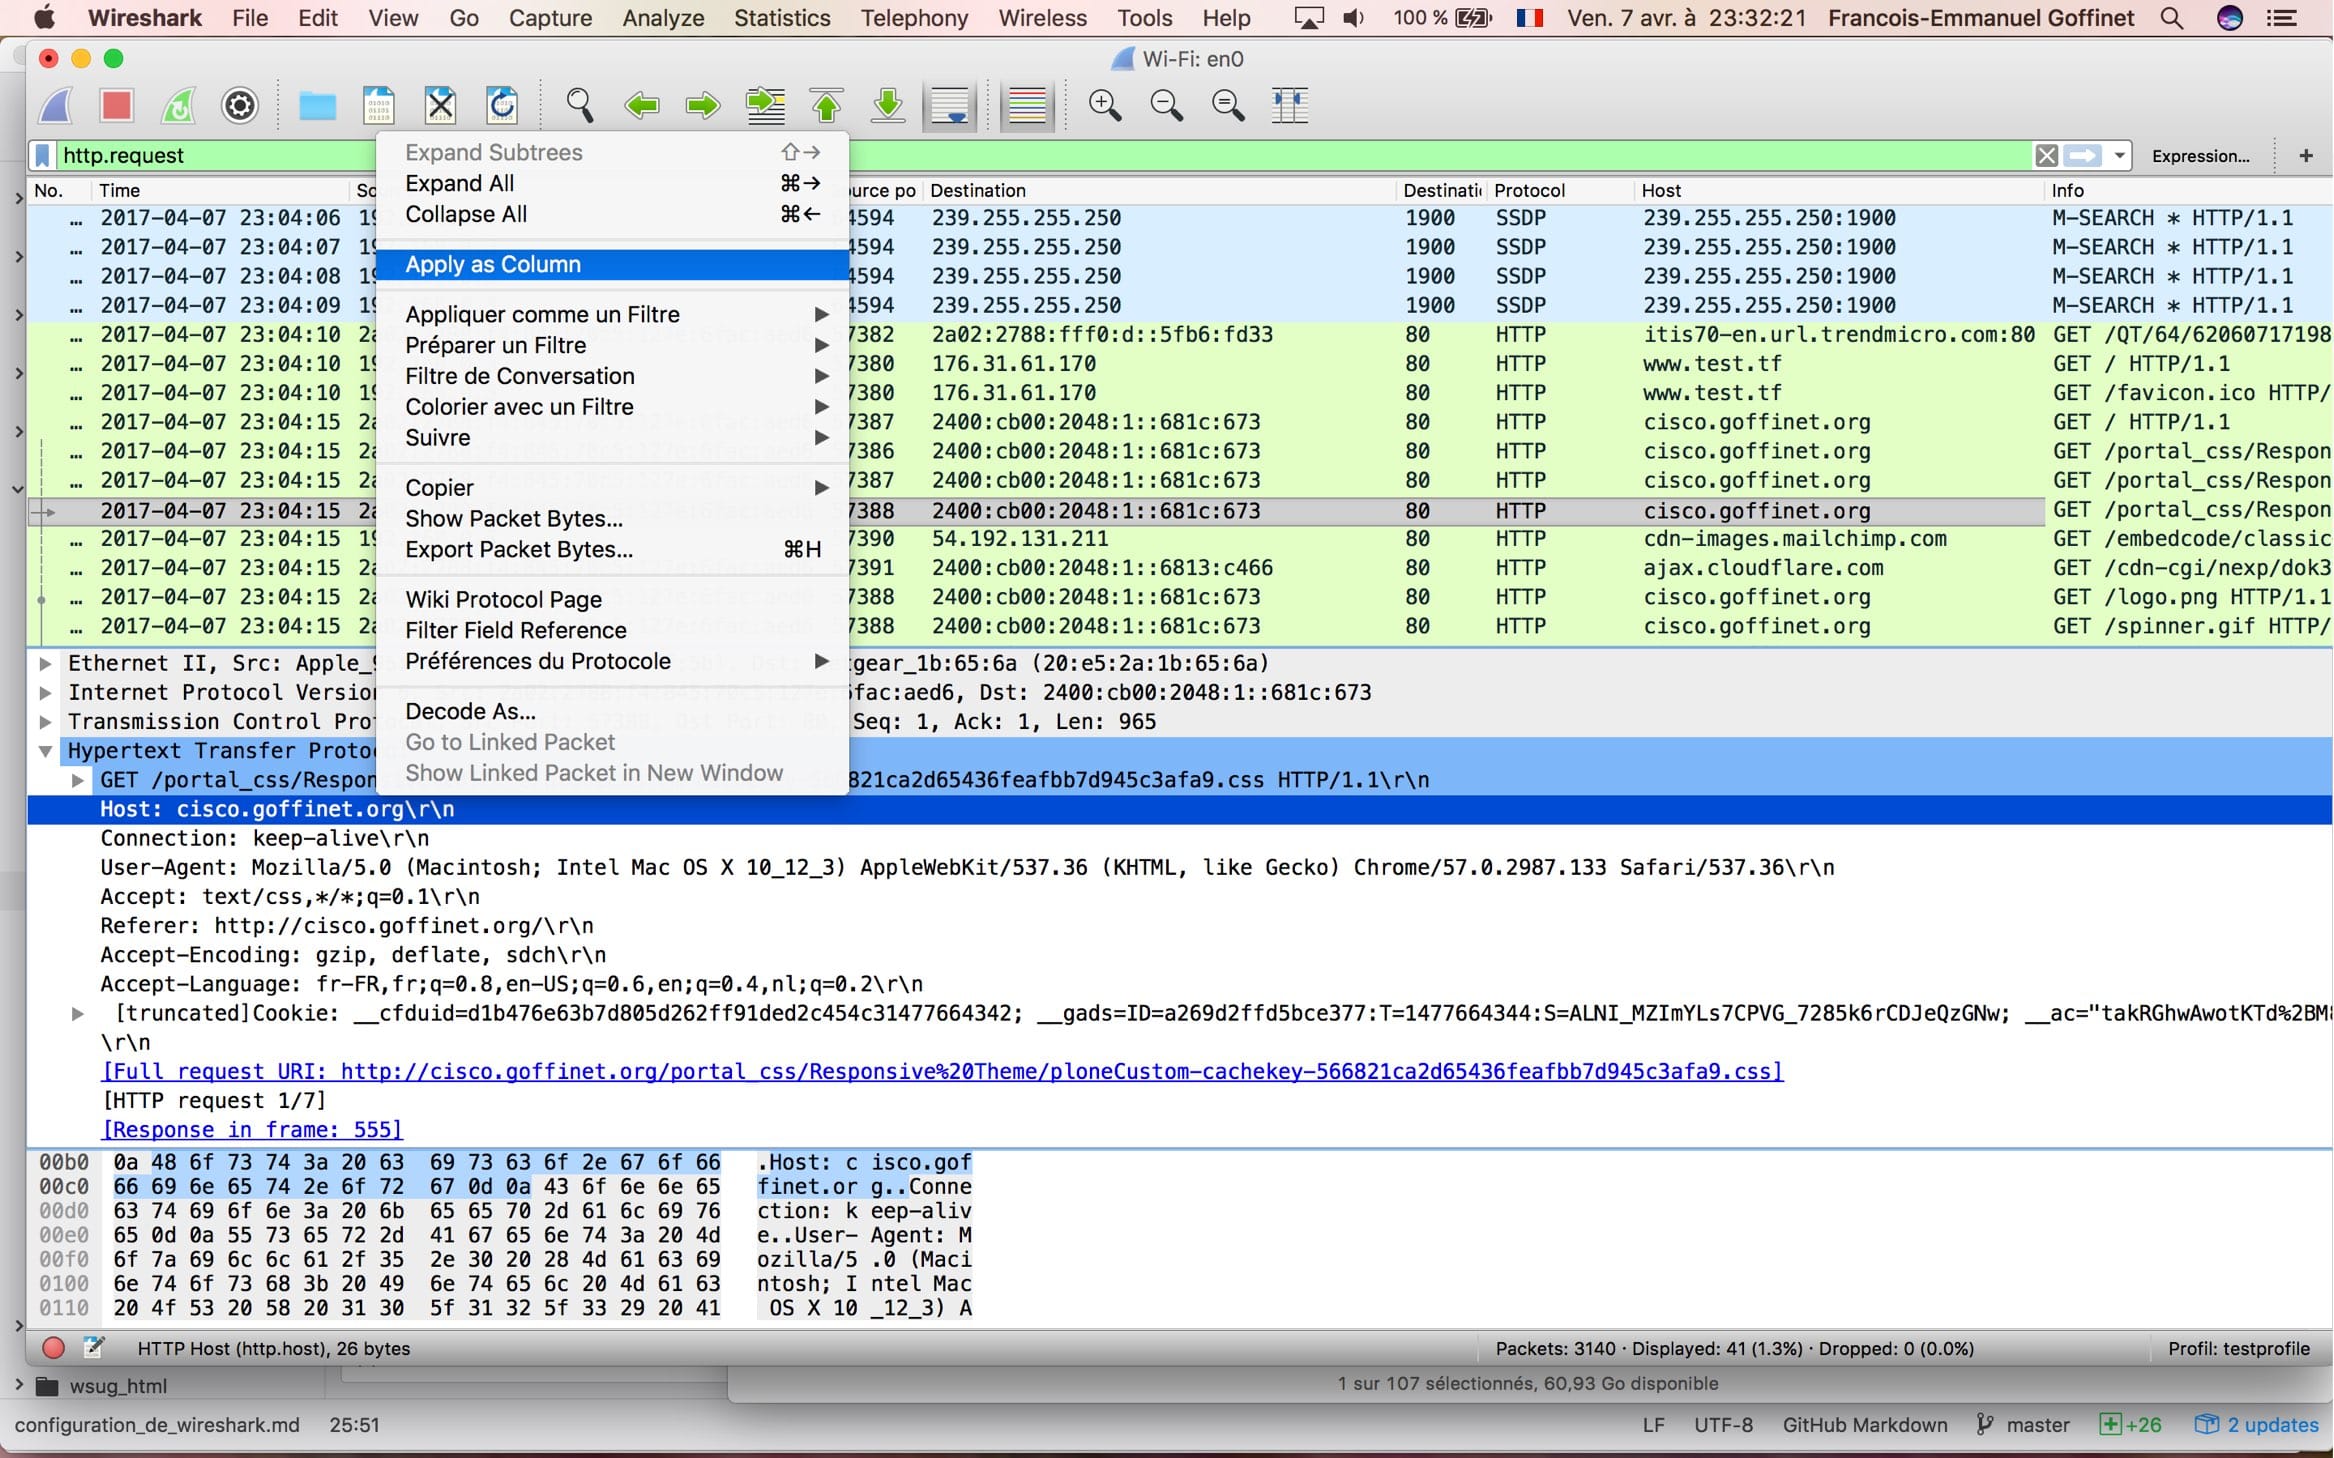 wireshark command line protocoll hierarchy